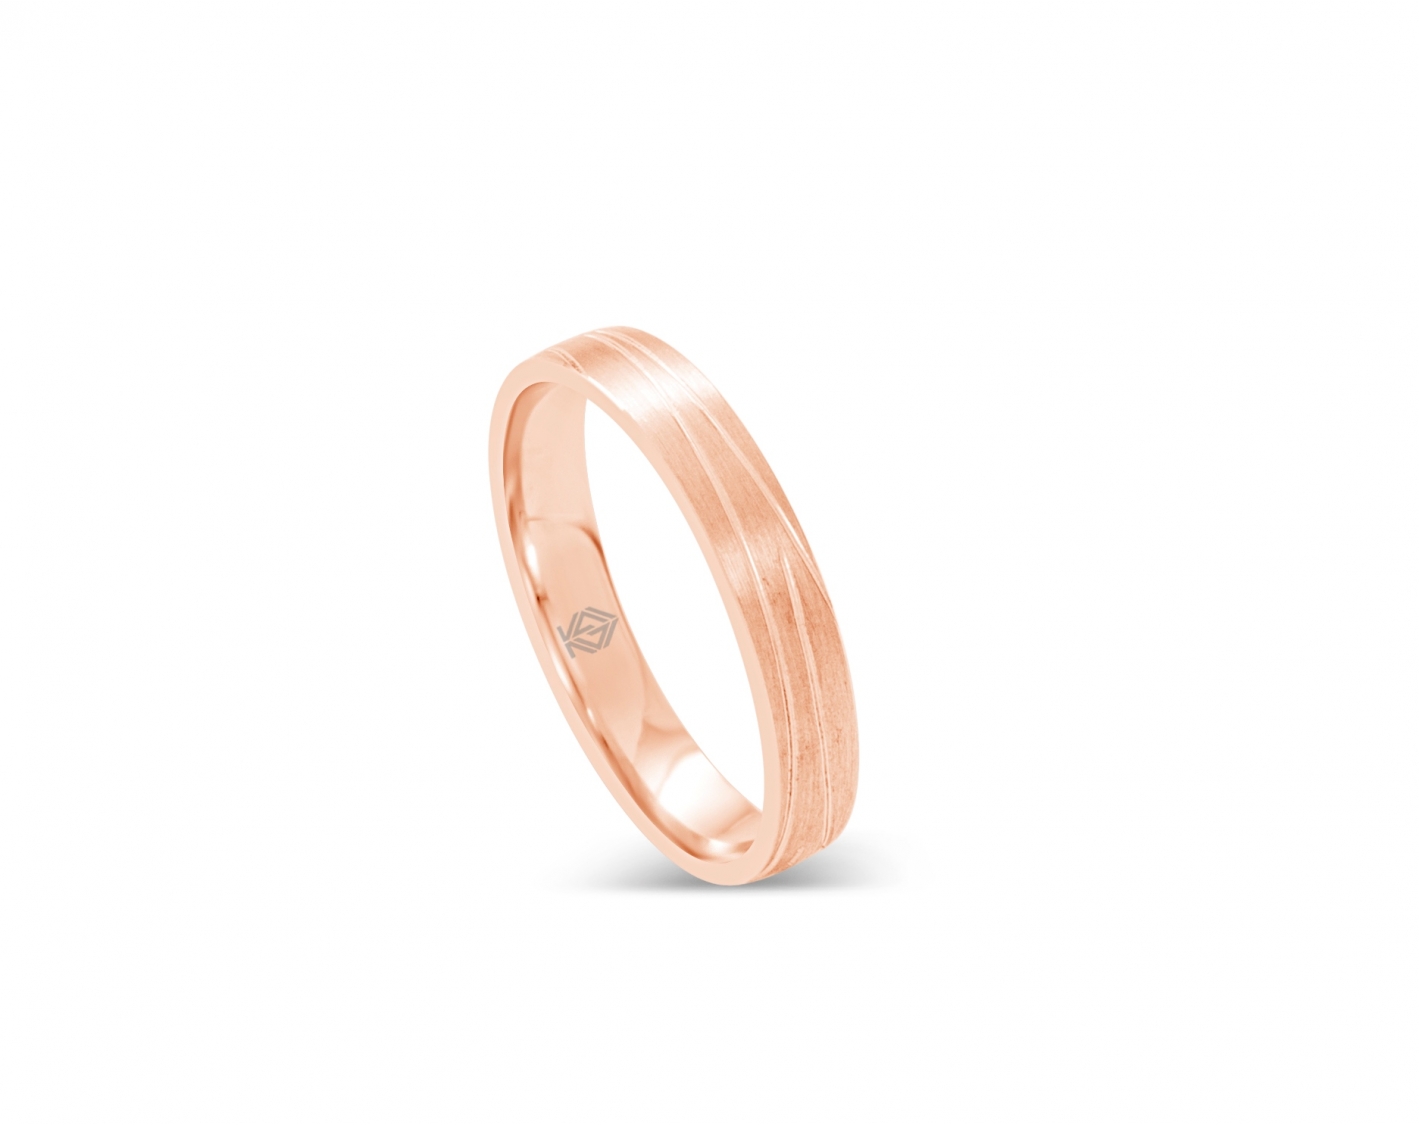 18k rose gold 4mm matte wedding ring with non-parallel inlays Photos & images